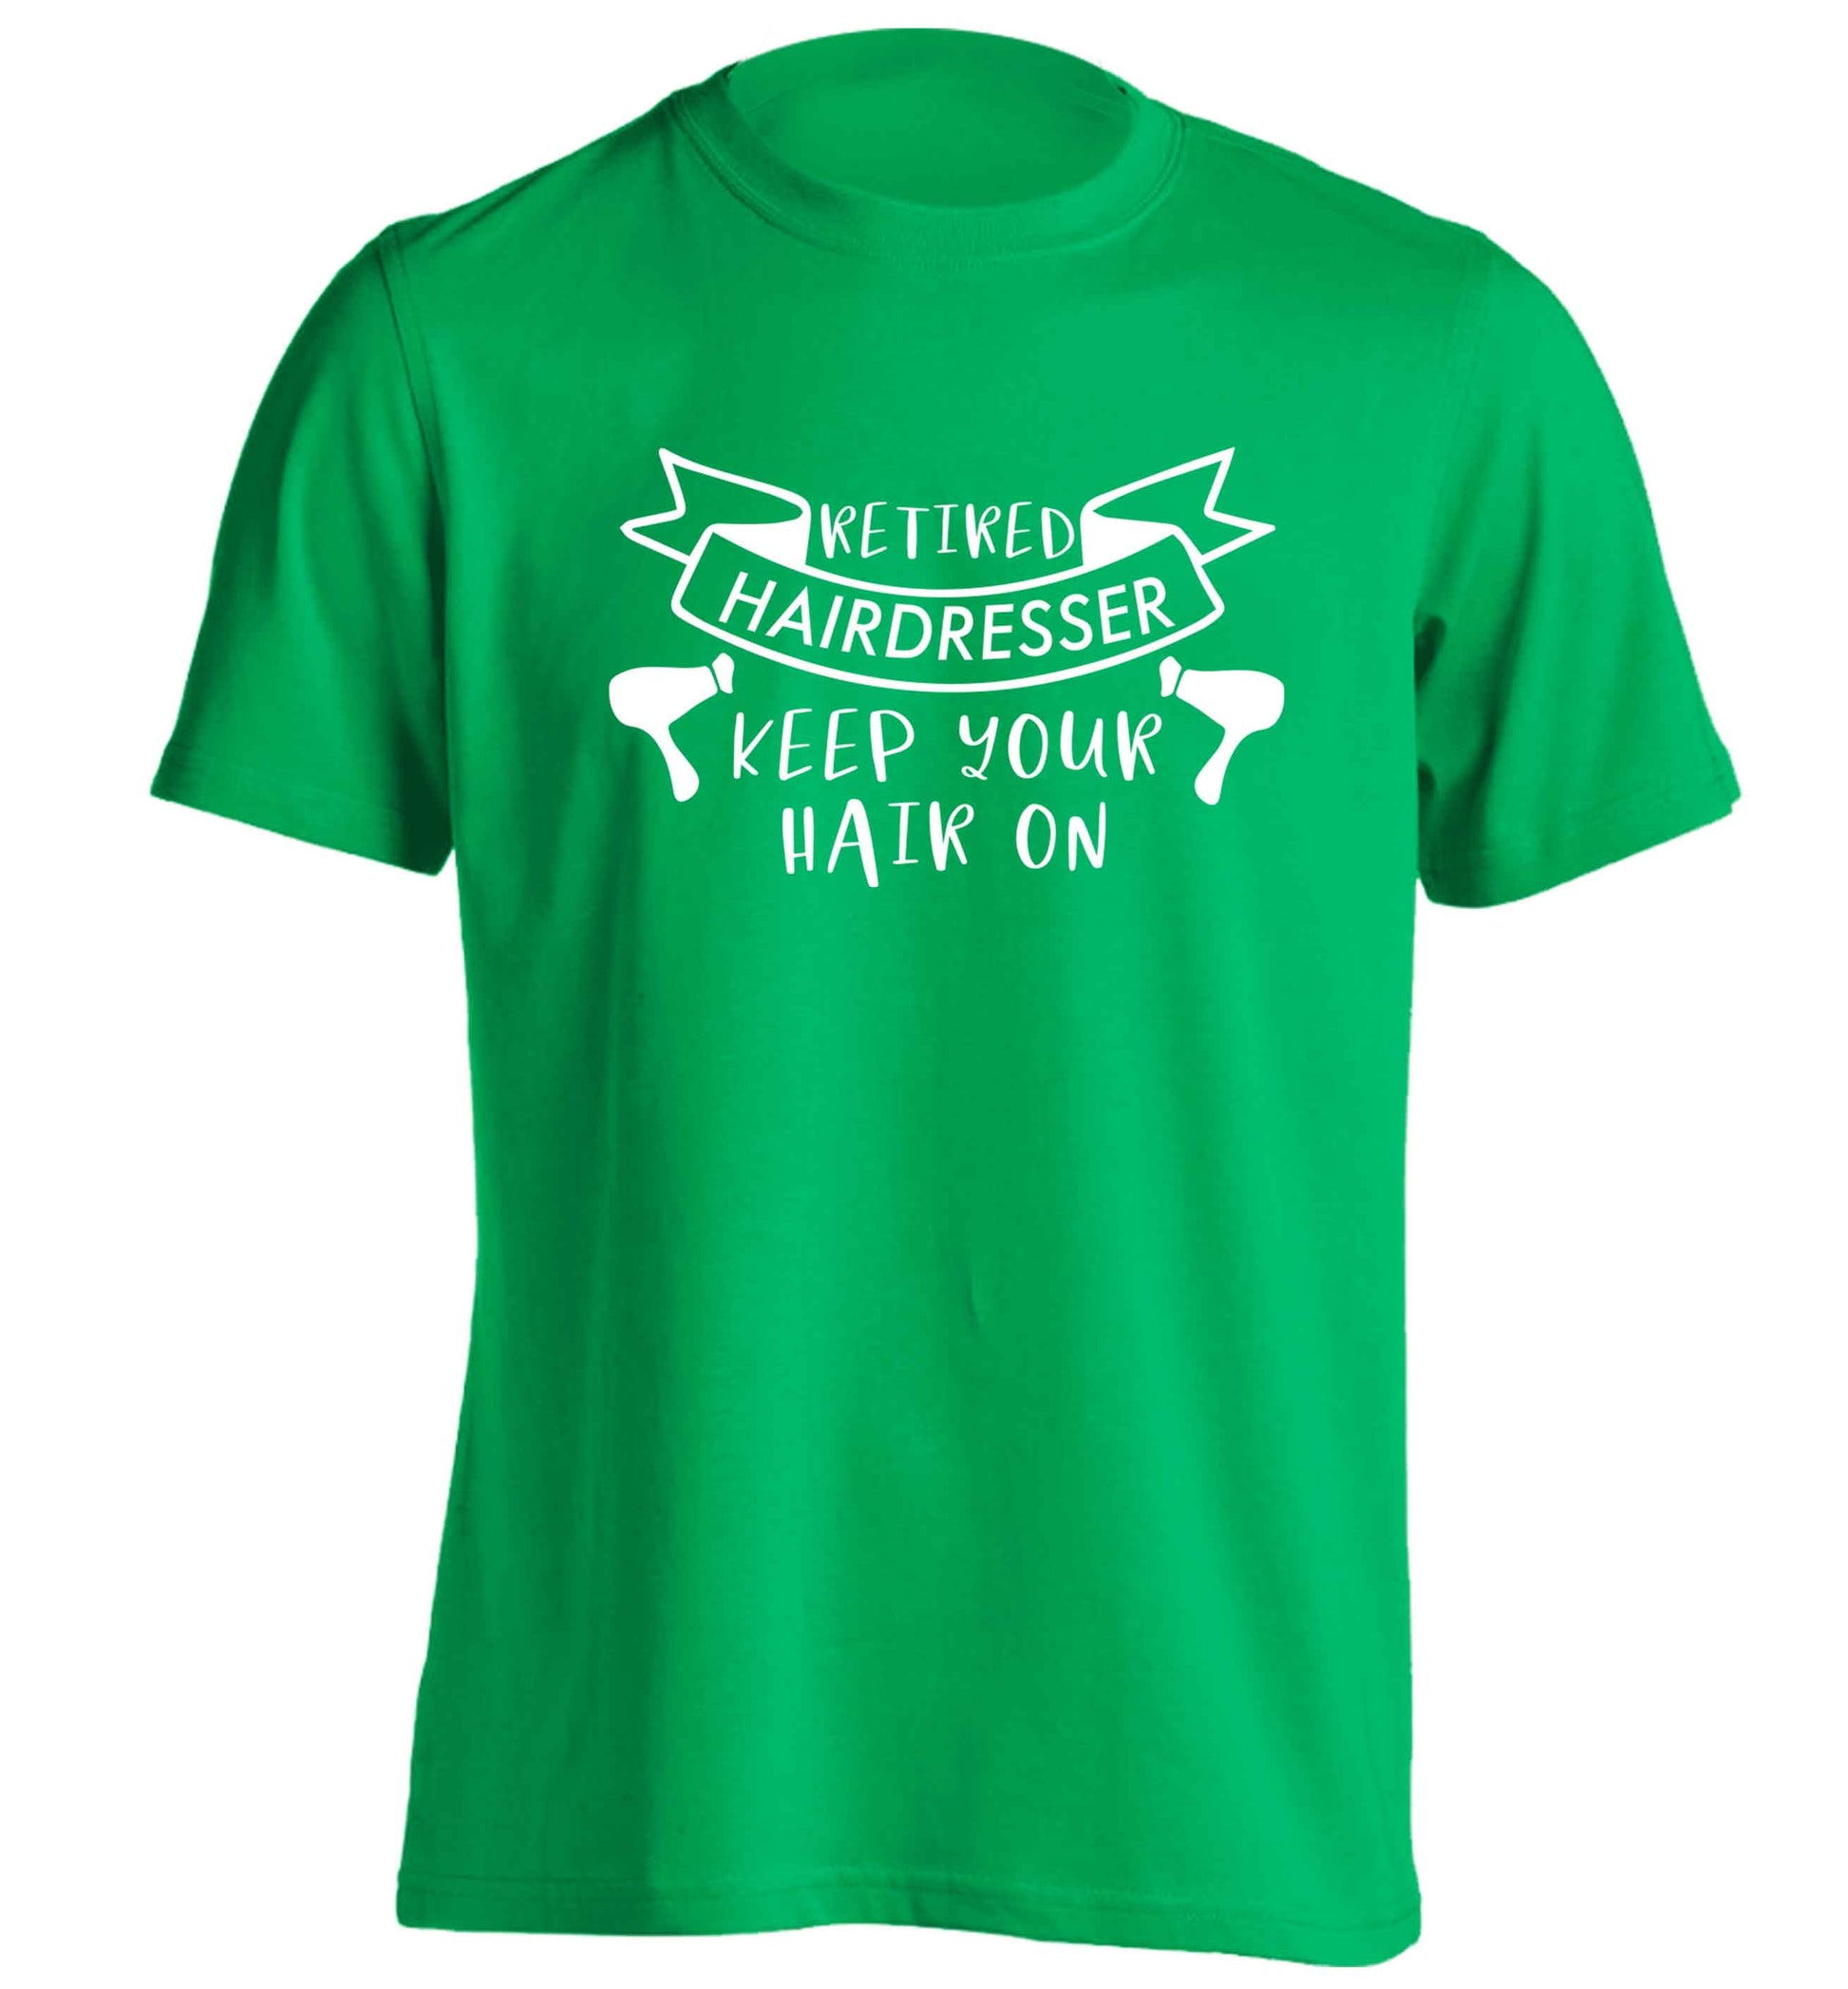 Retired hairdresser keep your hair on adults unisex green Tshirt 2XL